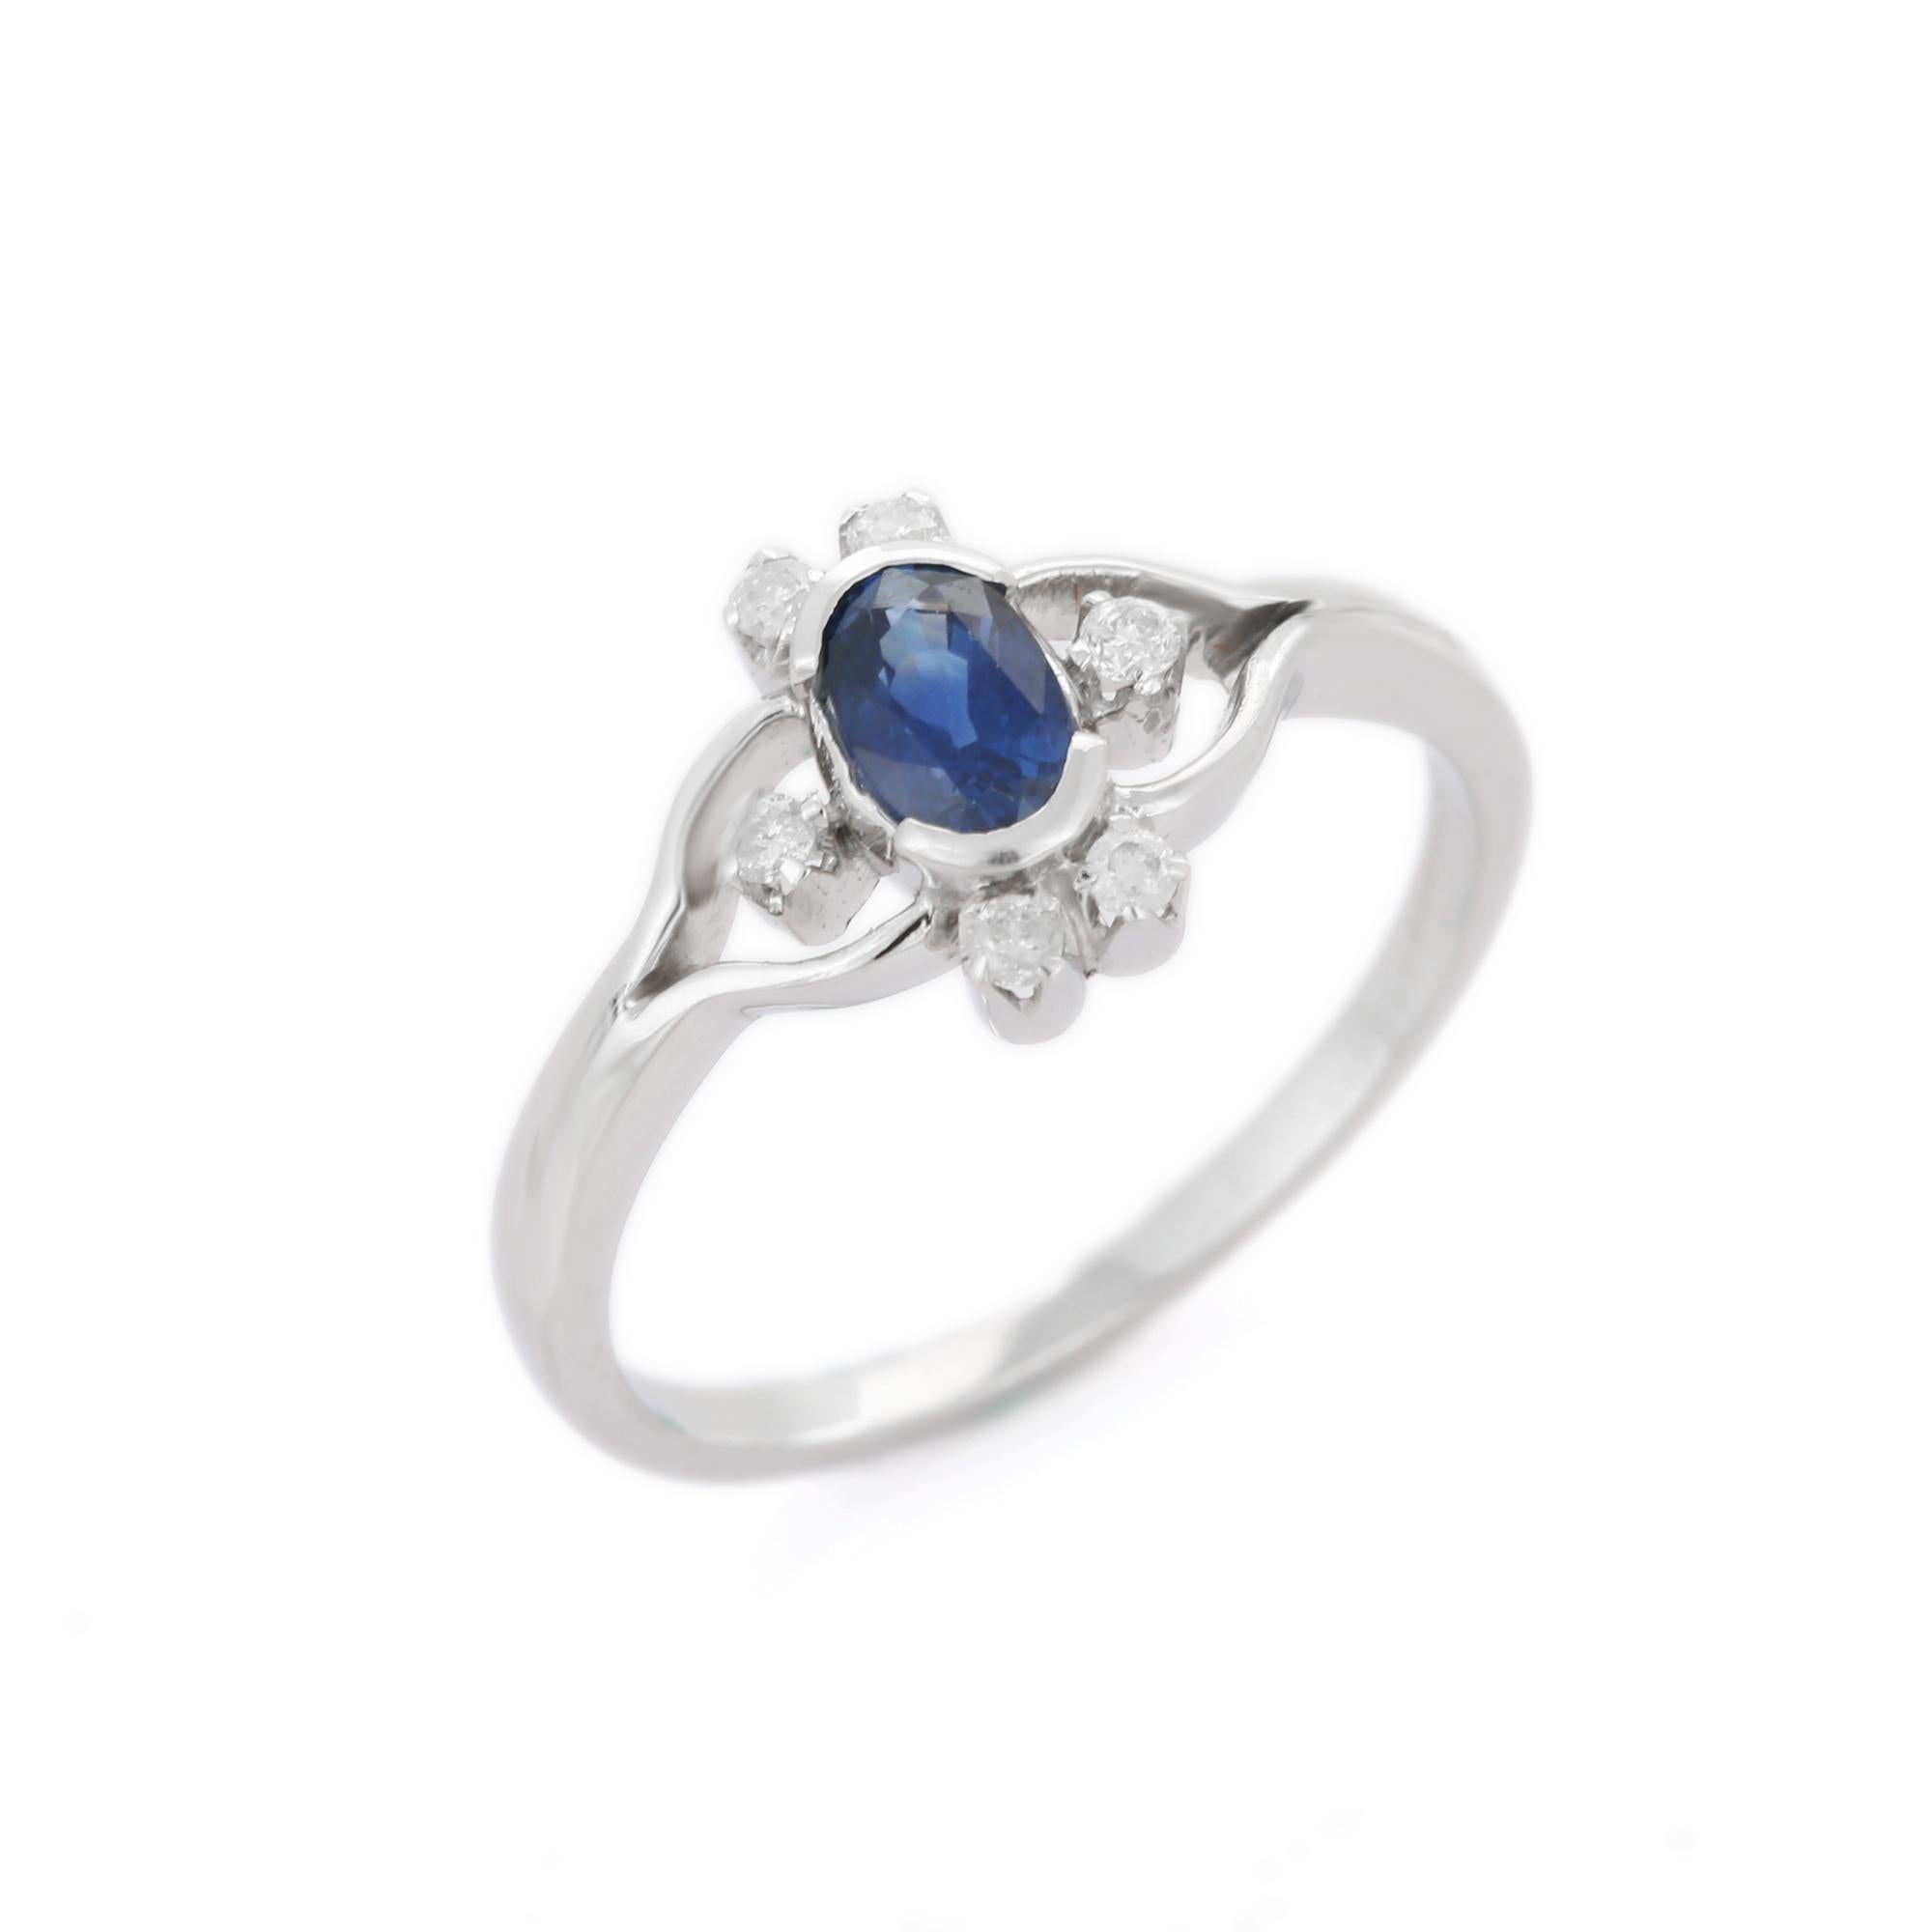 For Sale:  Solid 18k White Gold Vivid Oval Blue Sapphire and Diamond Wedding Ring 5